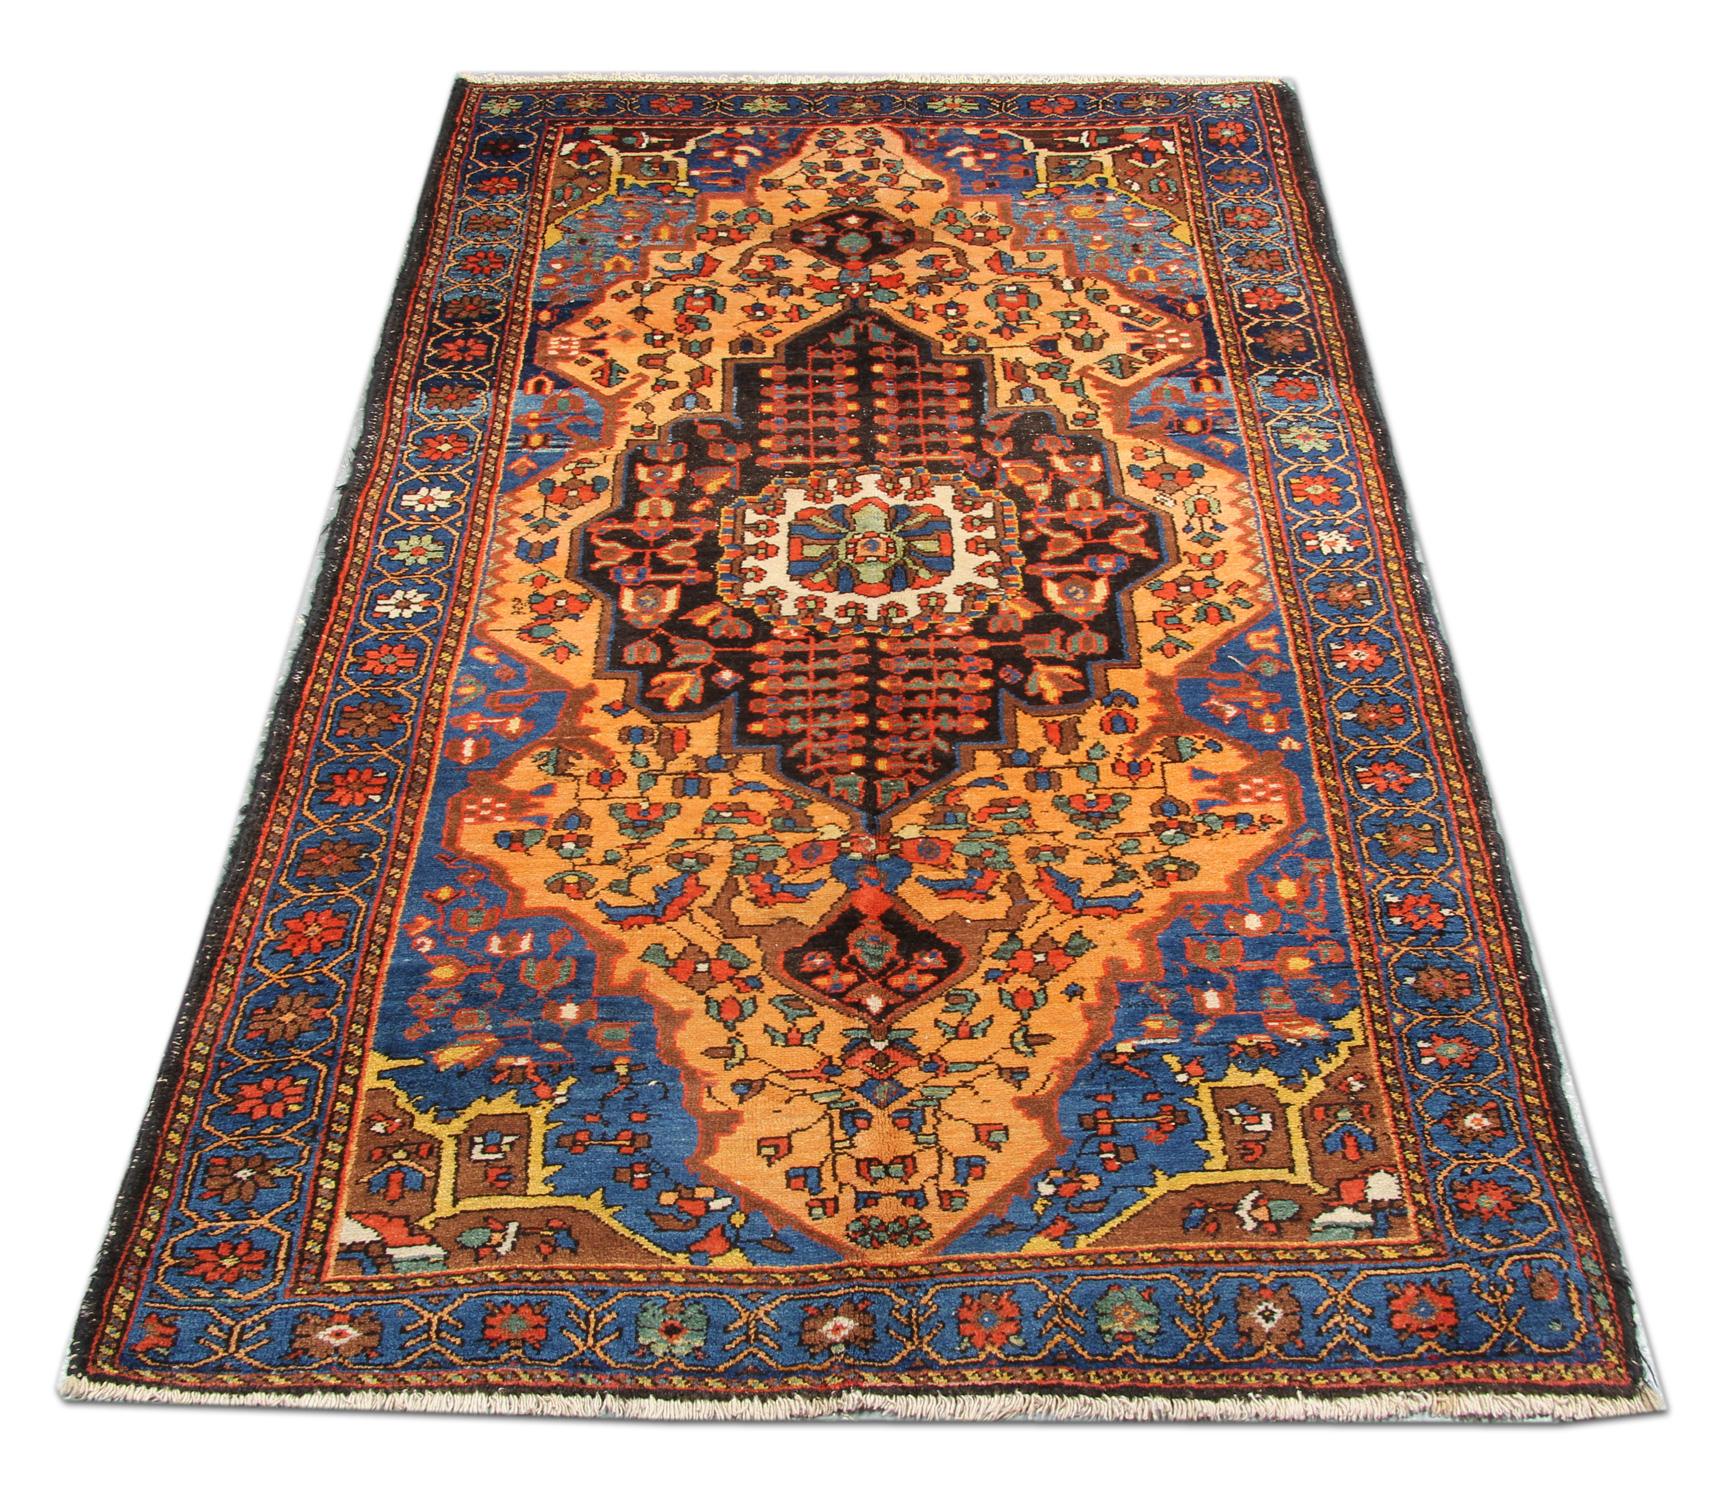 Handmade Carpet Antique Rug Traditional Yellow Rug Wool Living Room 133x193cm In Excellent Condition For Sale In Hampshire, GB